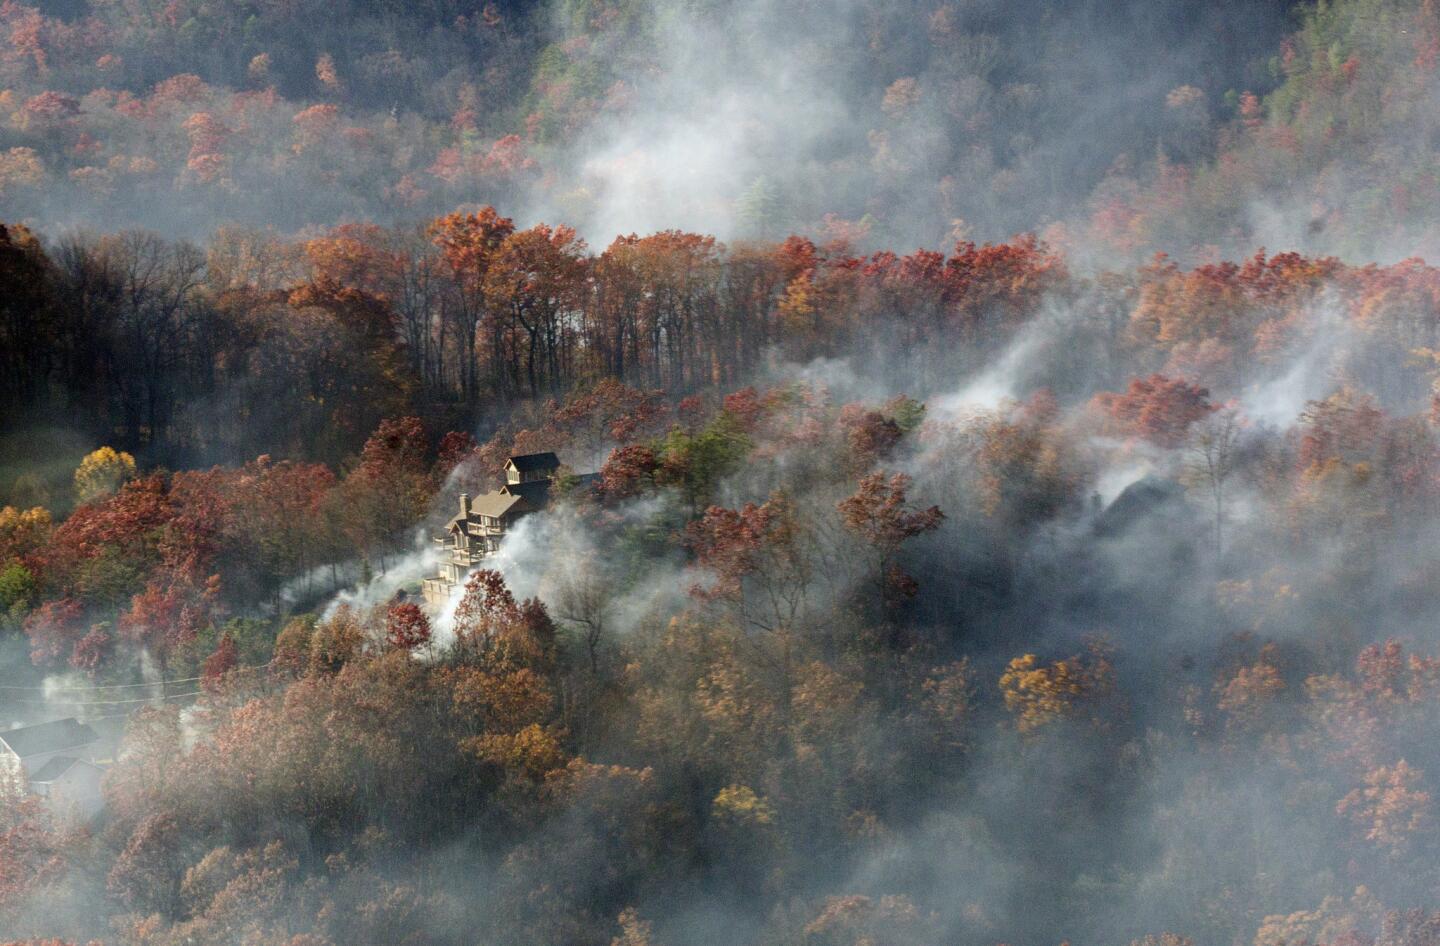 Smoke surrounds a home as seen from aboard a National Guard helicopter near Gatlinburg, Tenn. Thousands of people have fled deadly wildfires that have destroyed hundreds of homes and a resort in the Great Smoky Mountains.